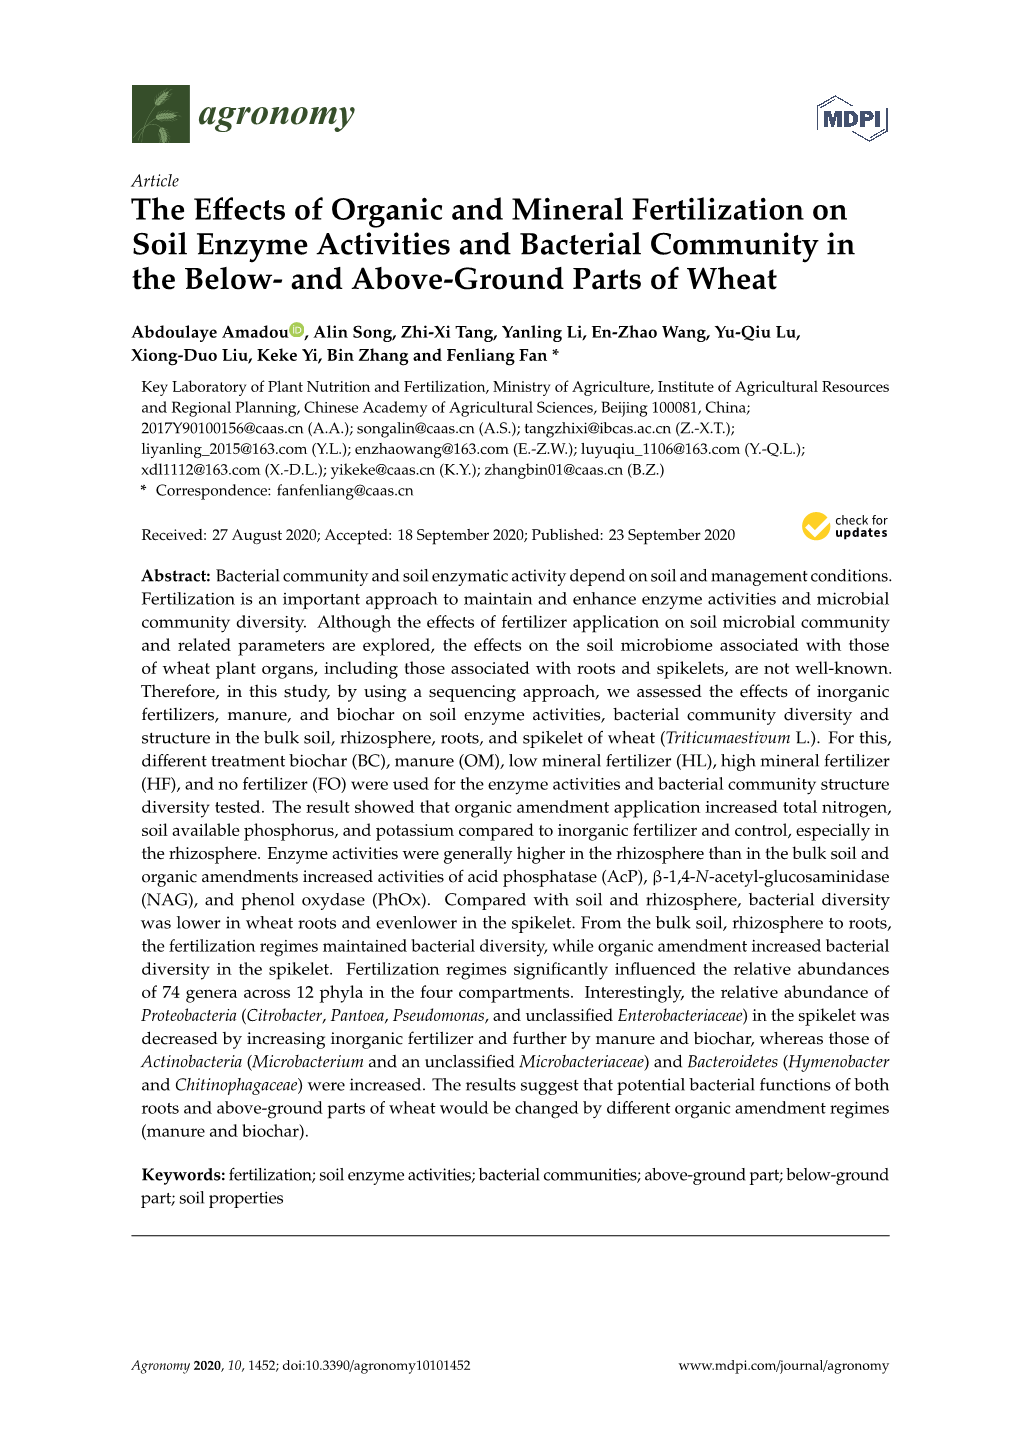 The Effects of Organic and Mineral Fertilization on Soil Enzyme Activities and Bacterial Community in the Below